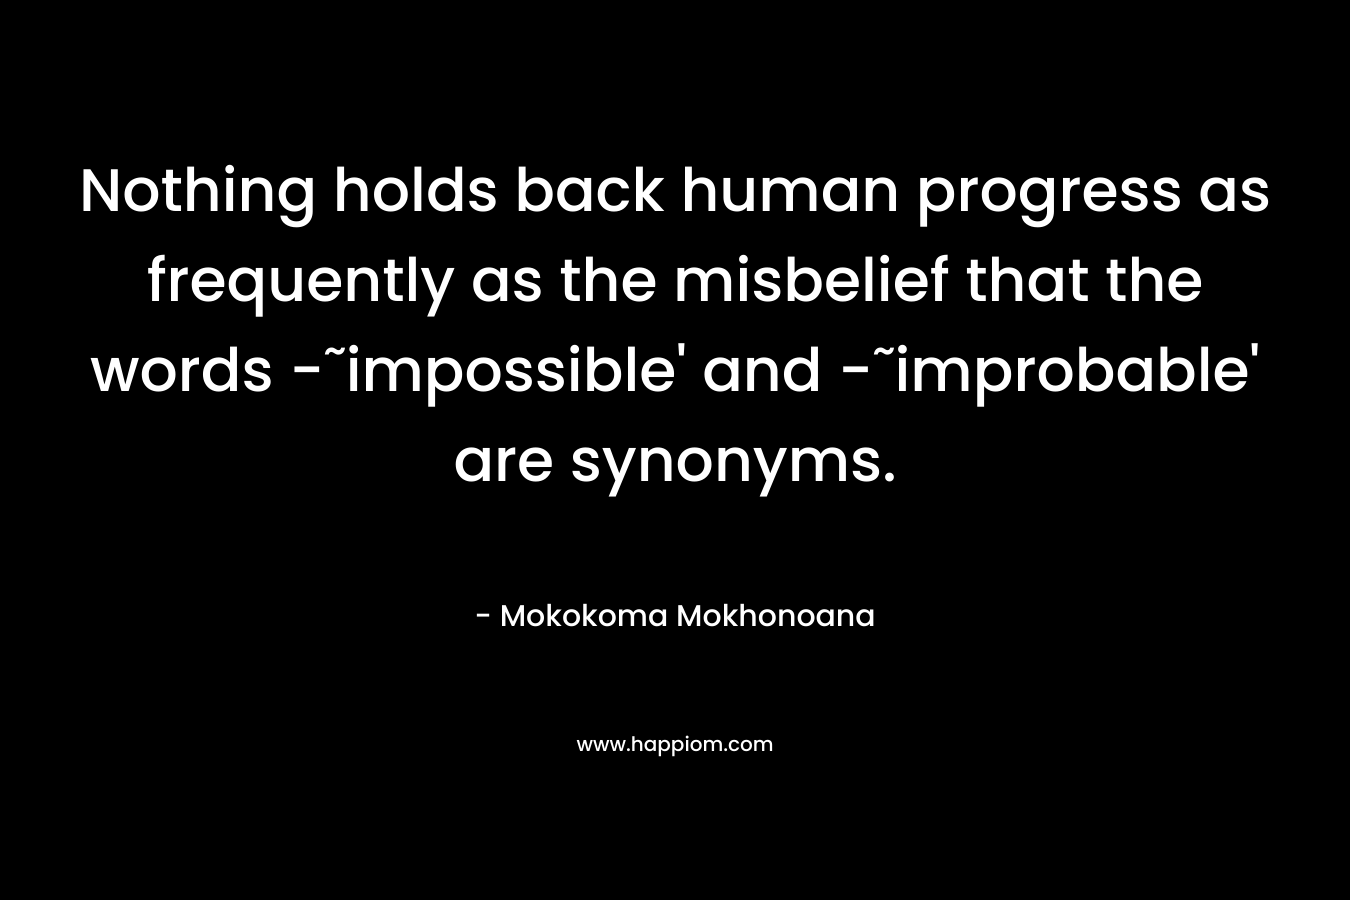 Nothing holds back human progress as frequently as the misbelief that the words -˜impossible’ and -˜improbable’ are synonyms. – Mokokoma Mokhonoana